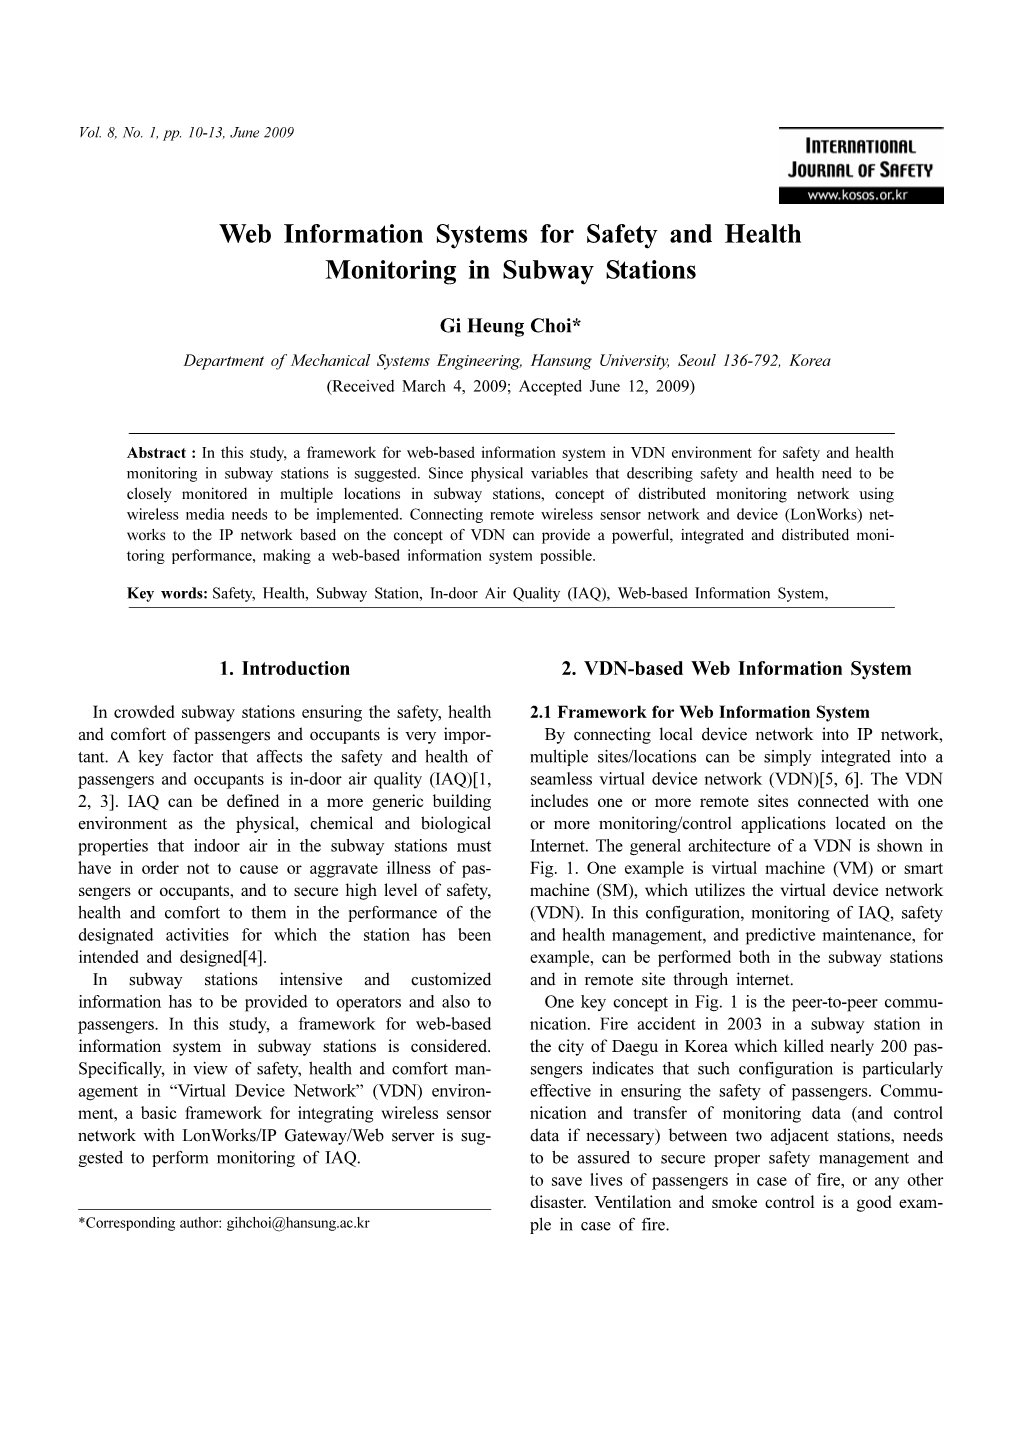 Web Information Systems for Safety and Health Monitoring in Subway Stations